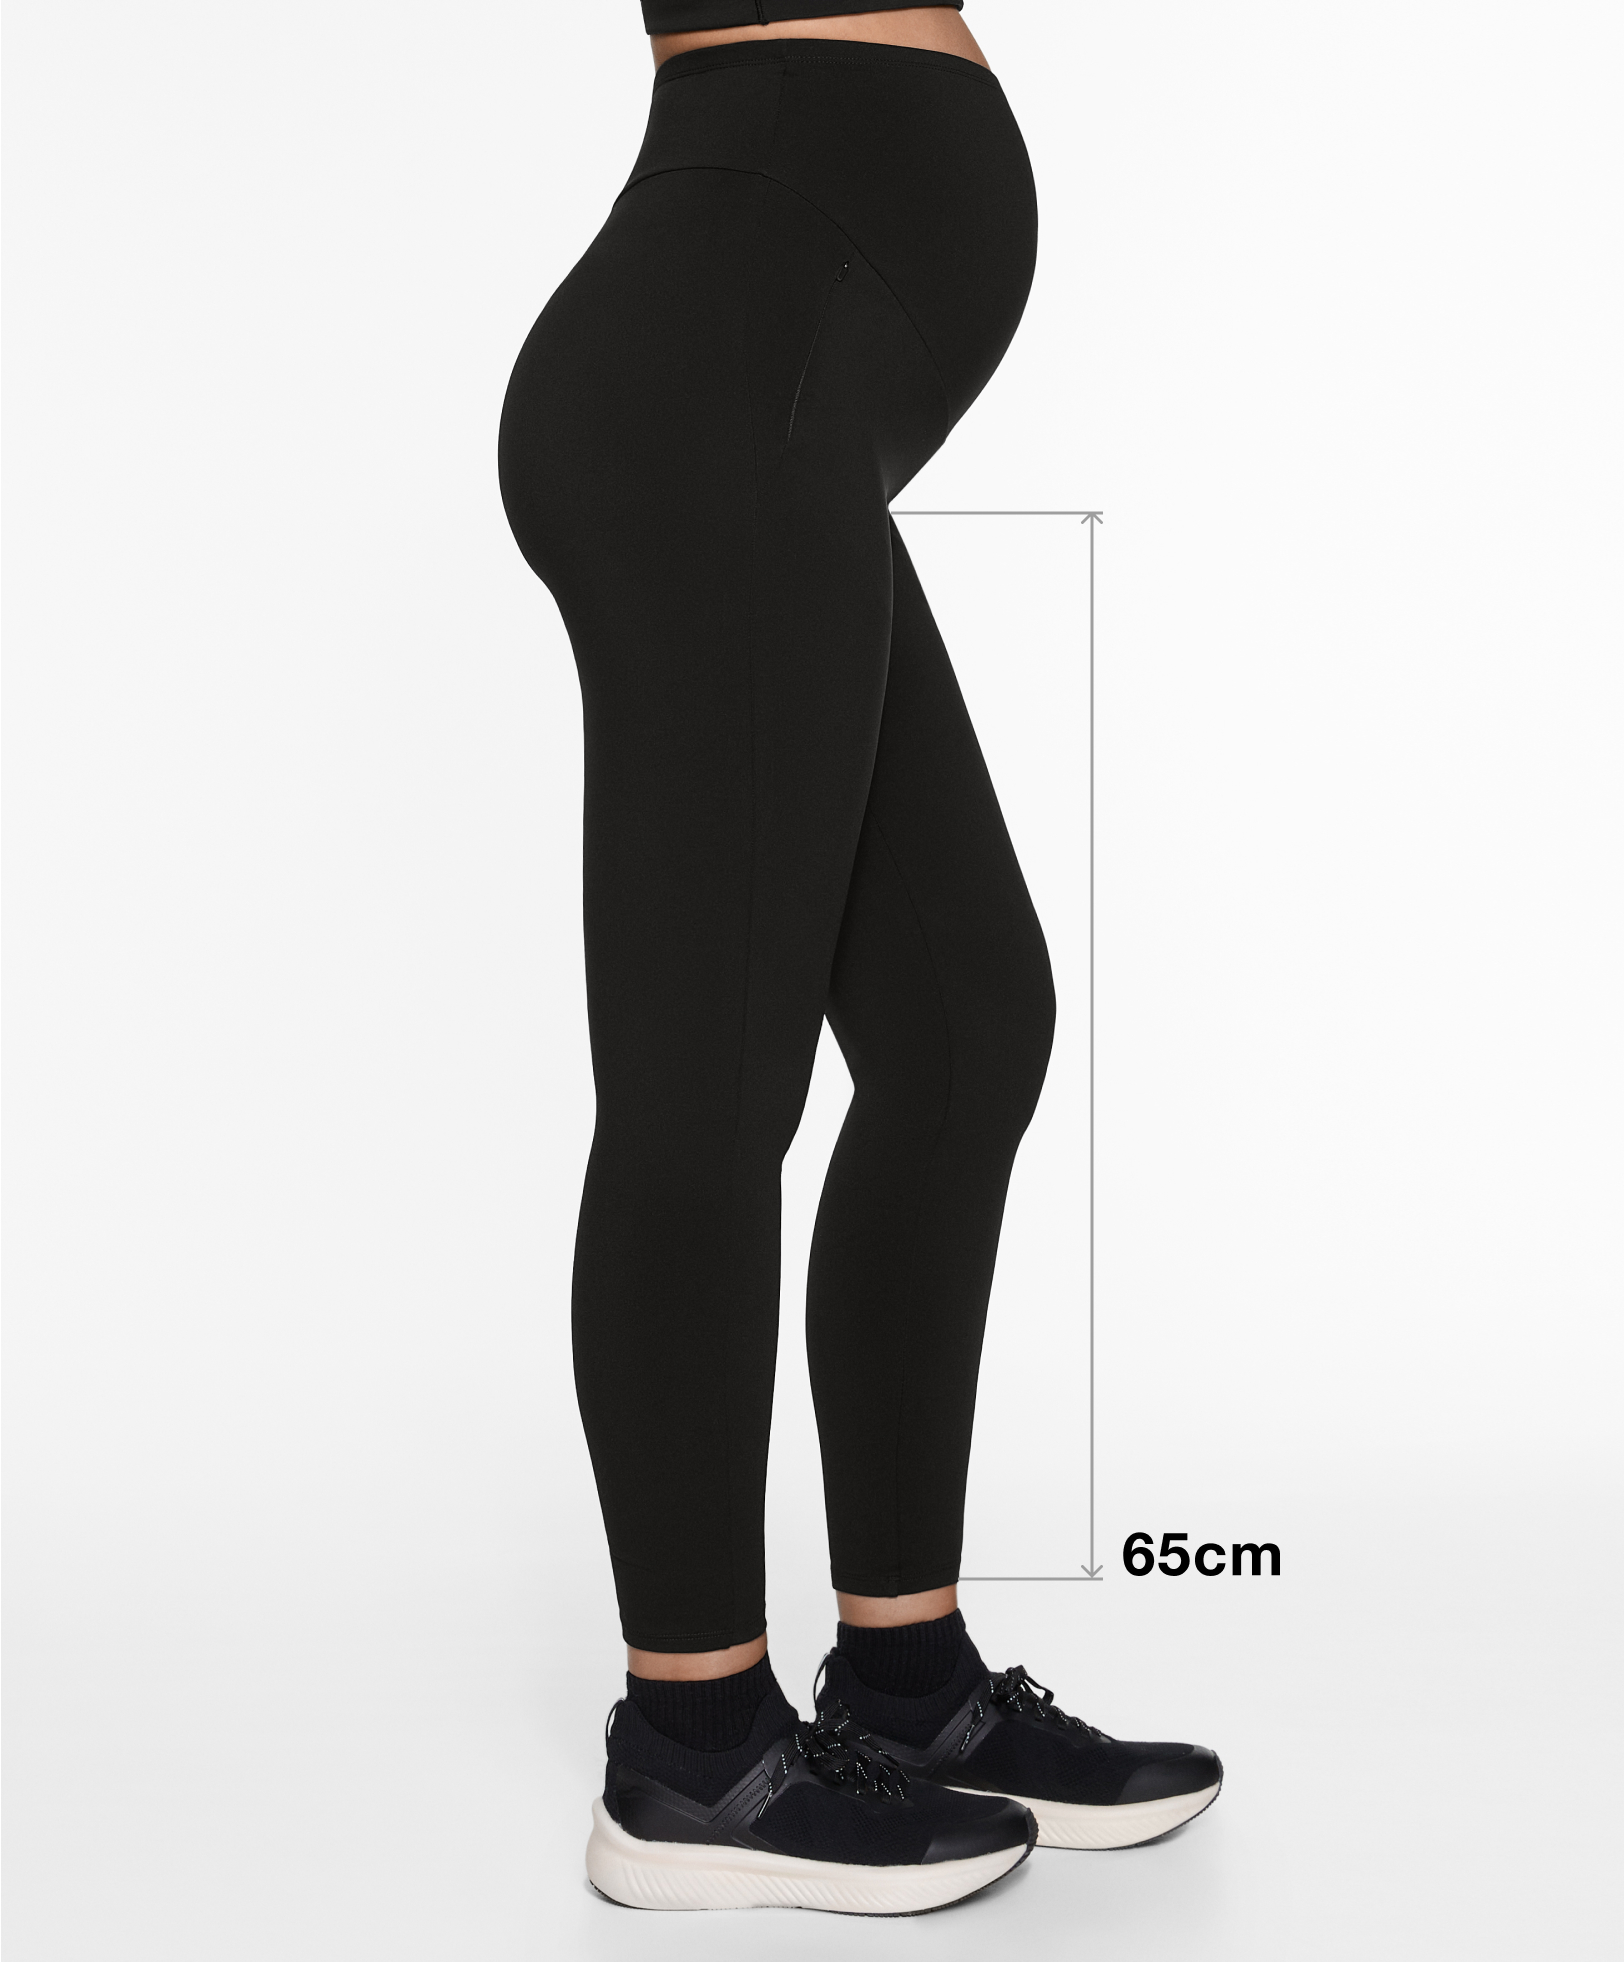 Taking Care of Your Maternity Leggings